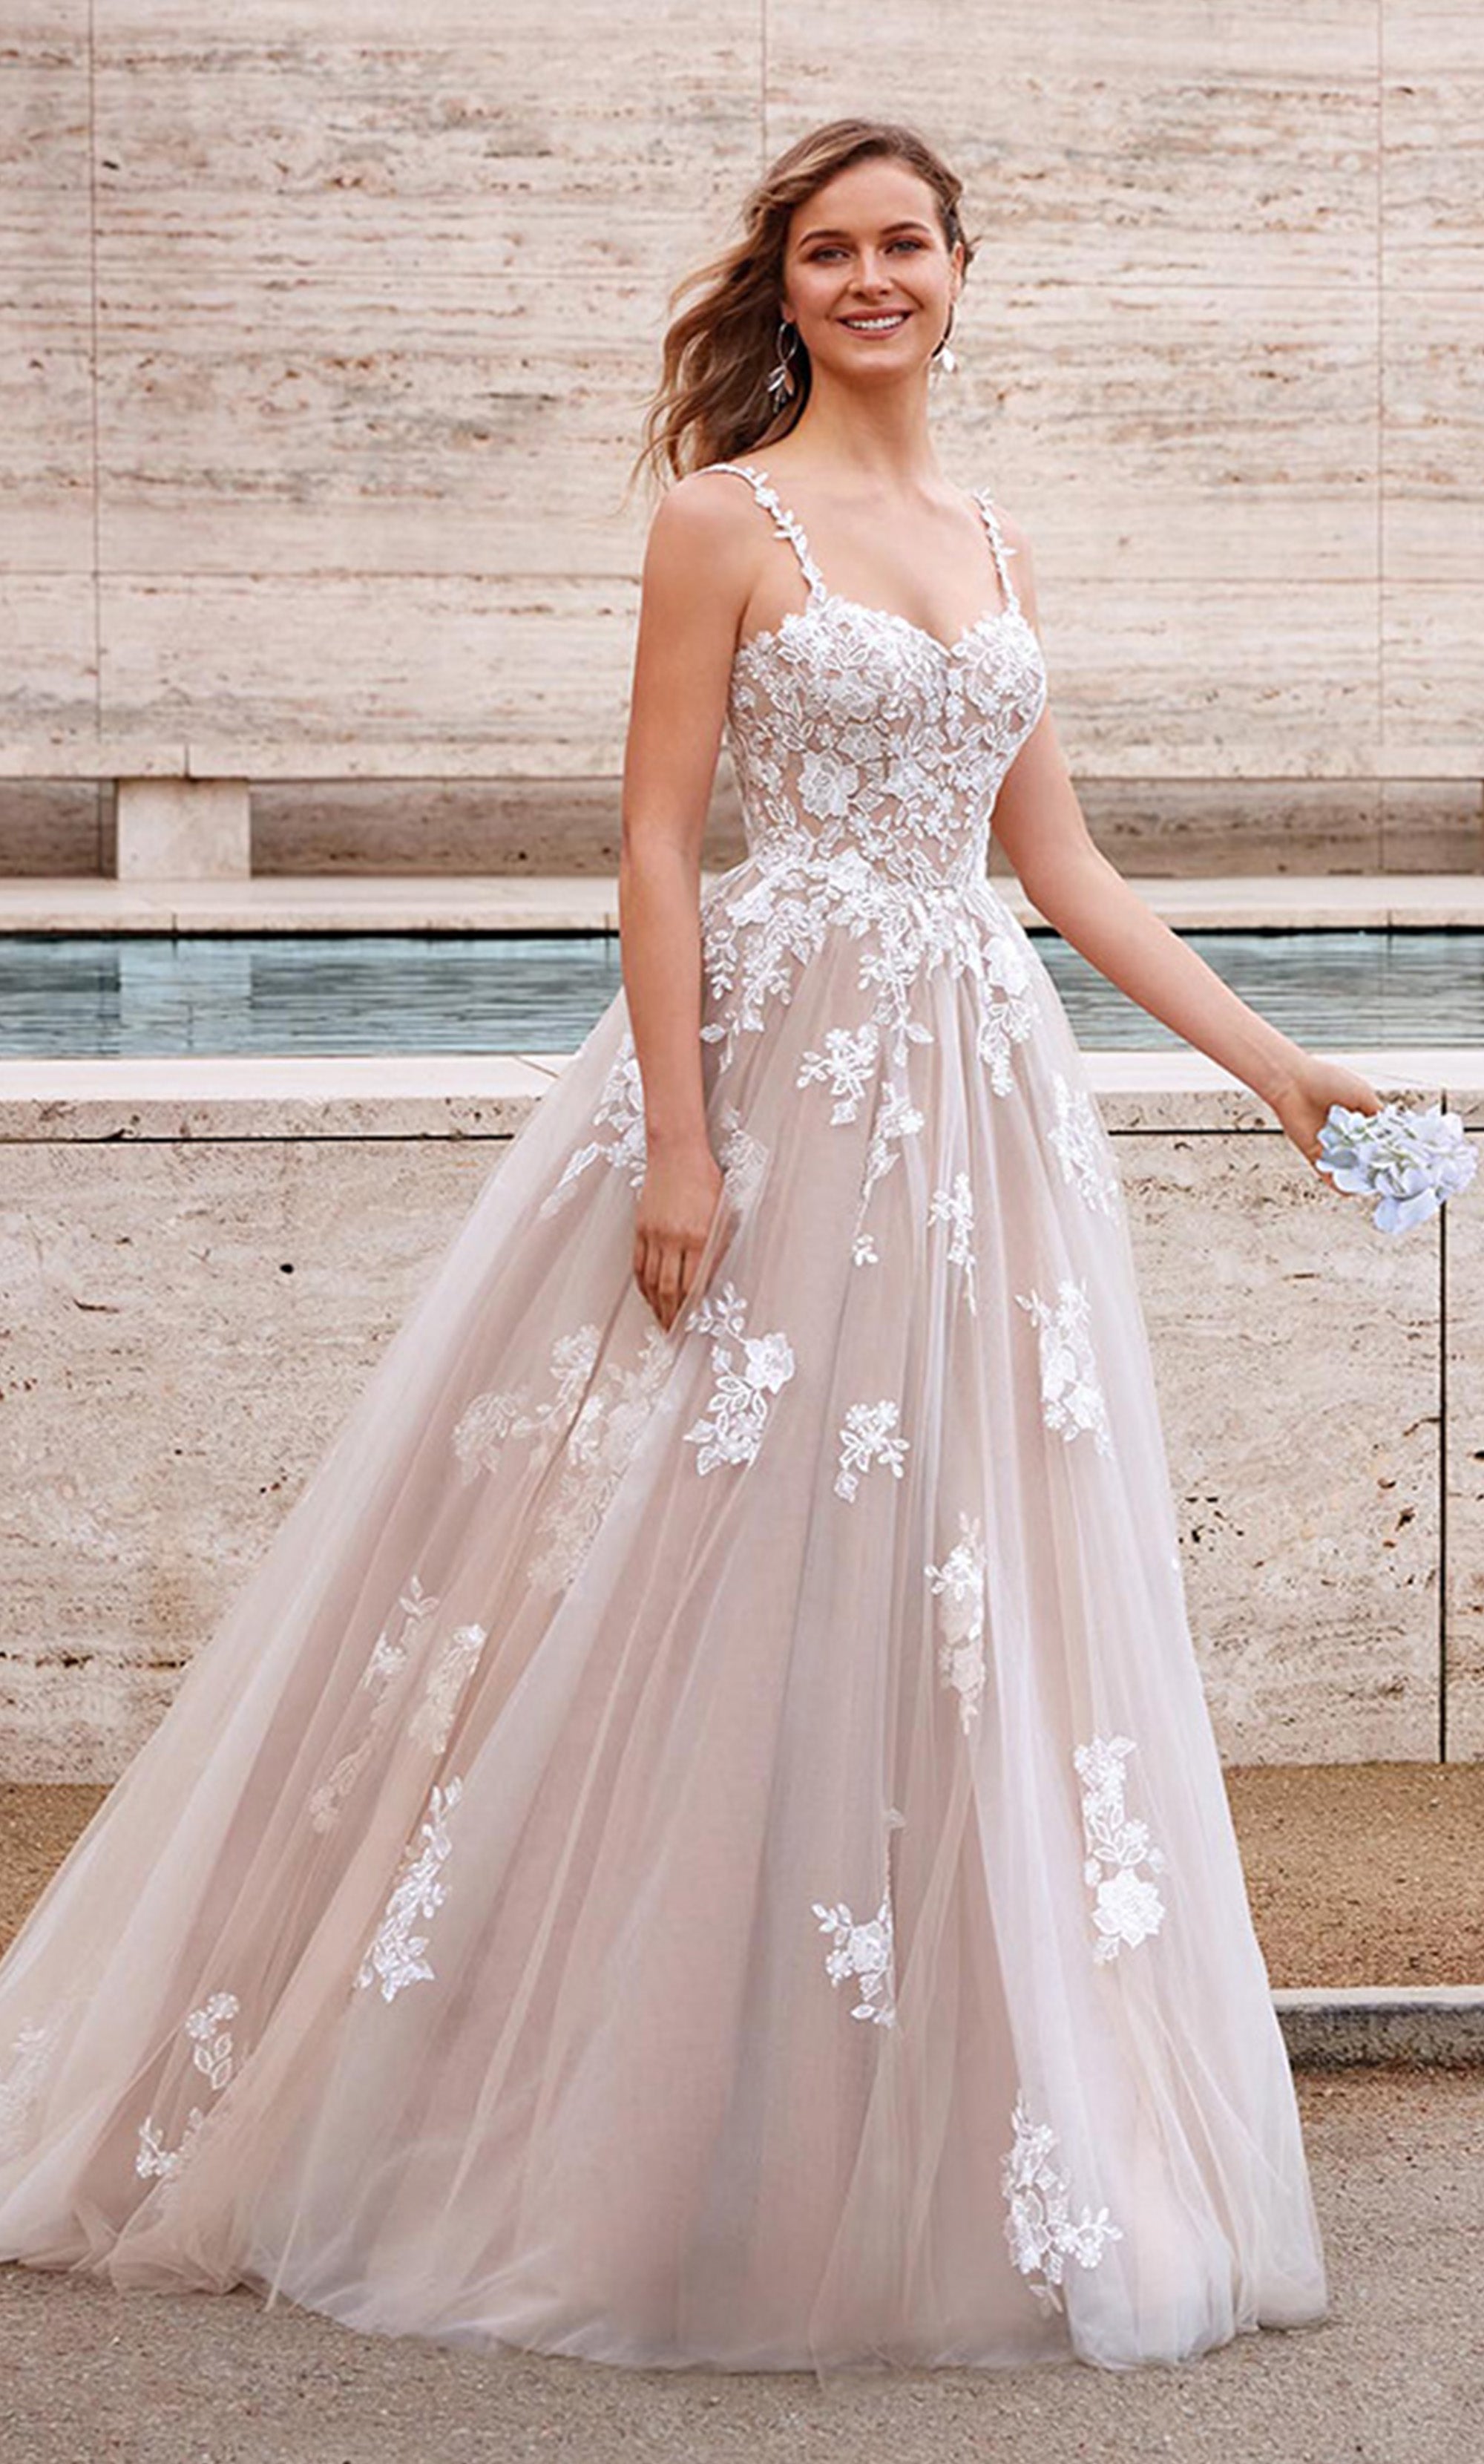 Find Your Fairytale Princess Wedding Dress: Our Favorite Gowns